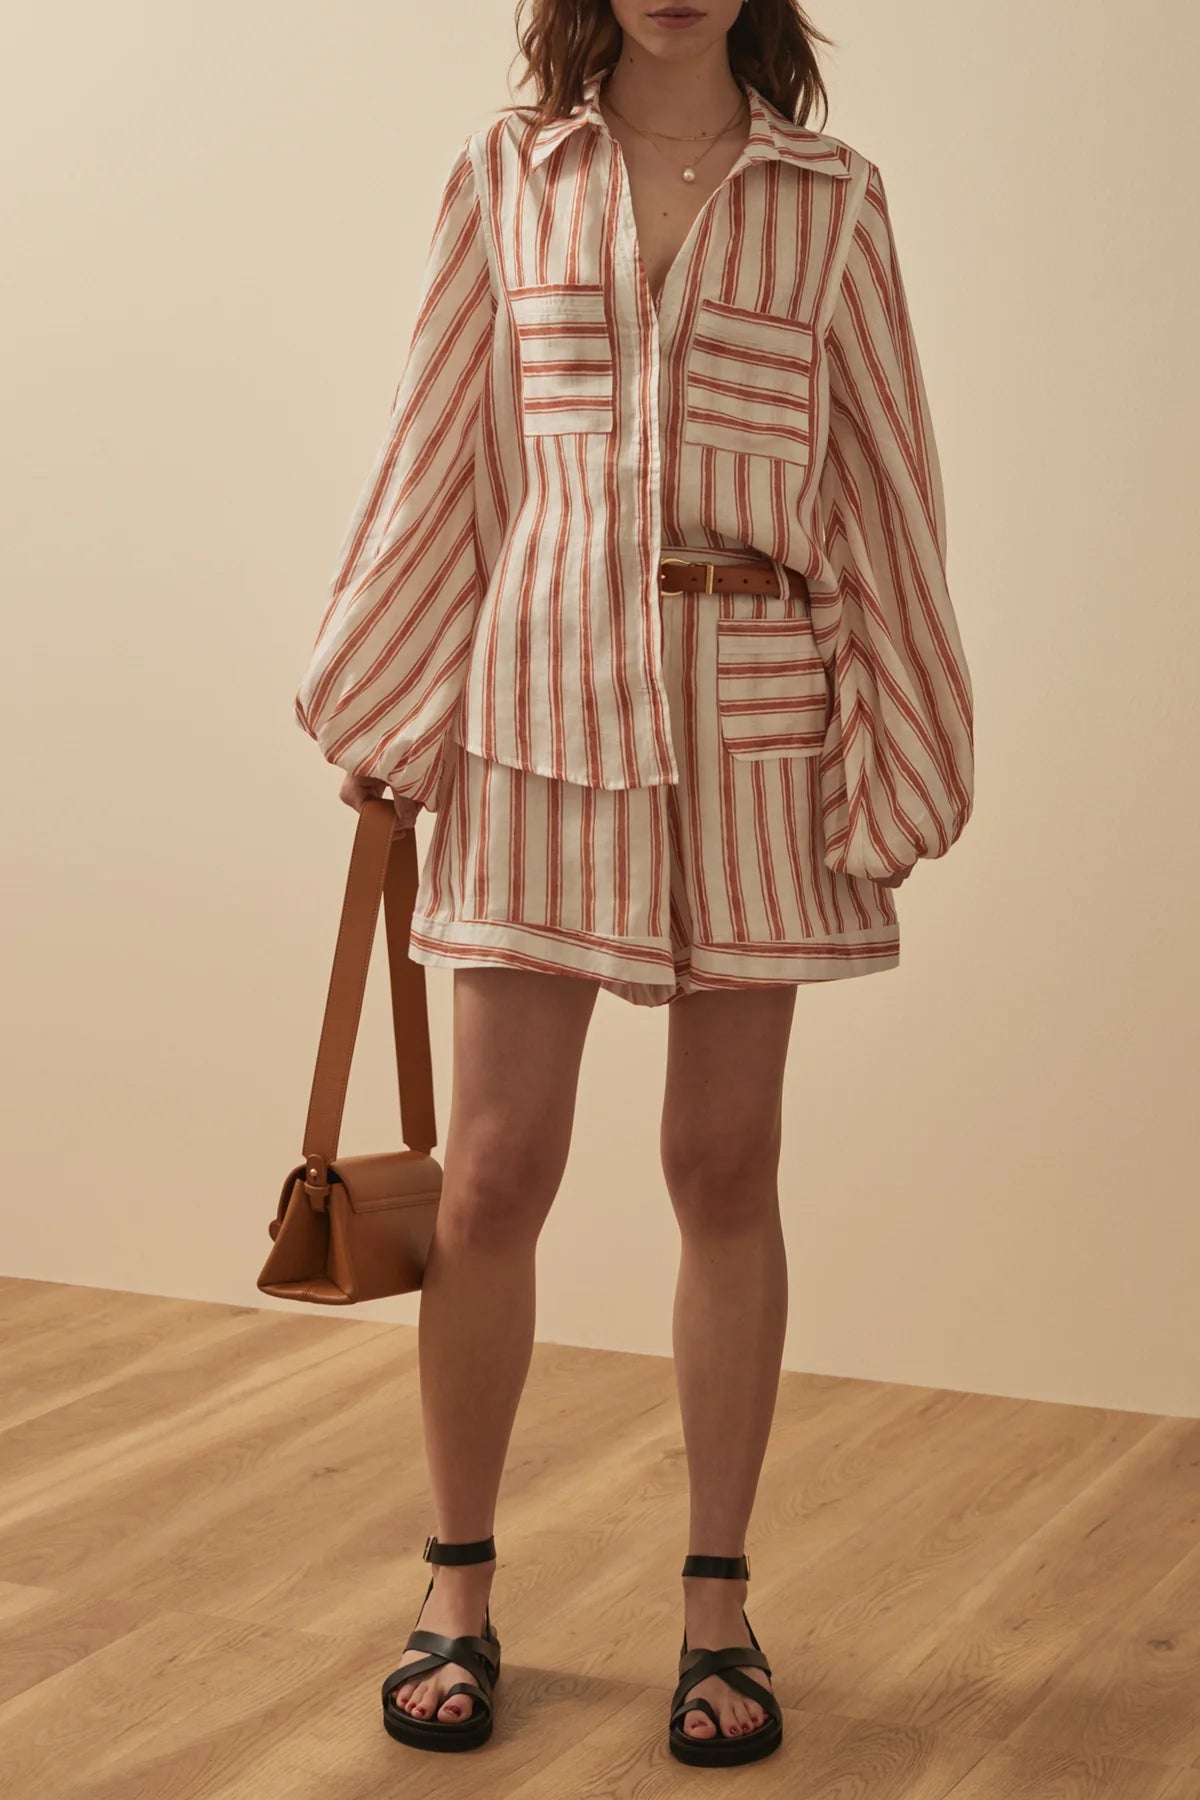  Brown and white striped linen shirt with balloon sleeves